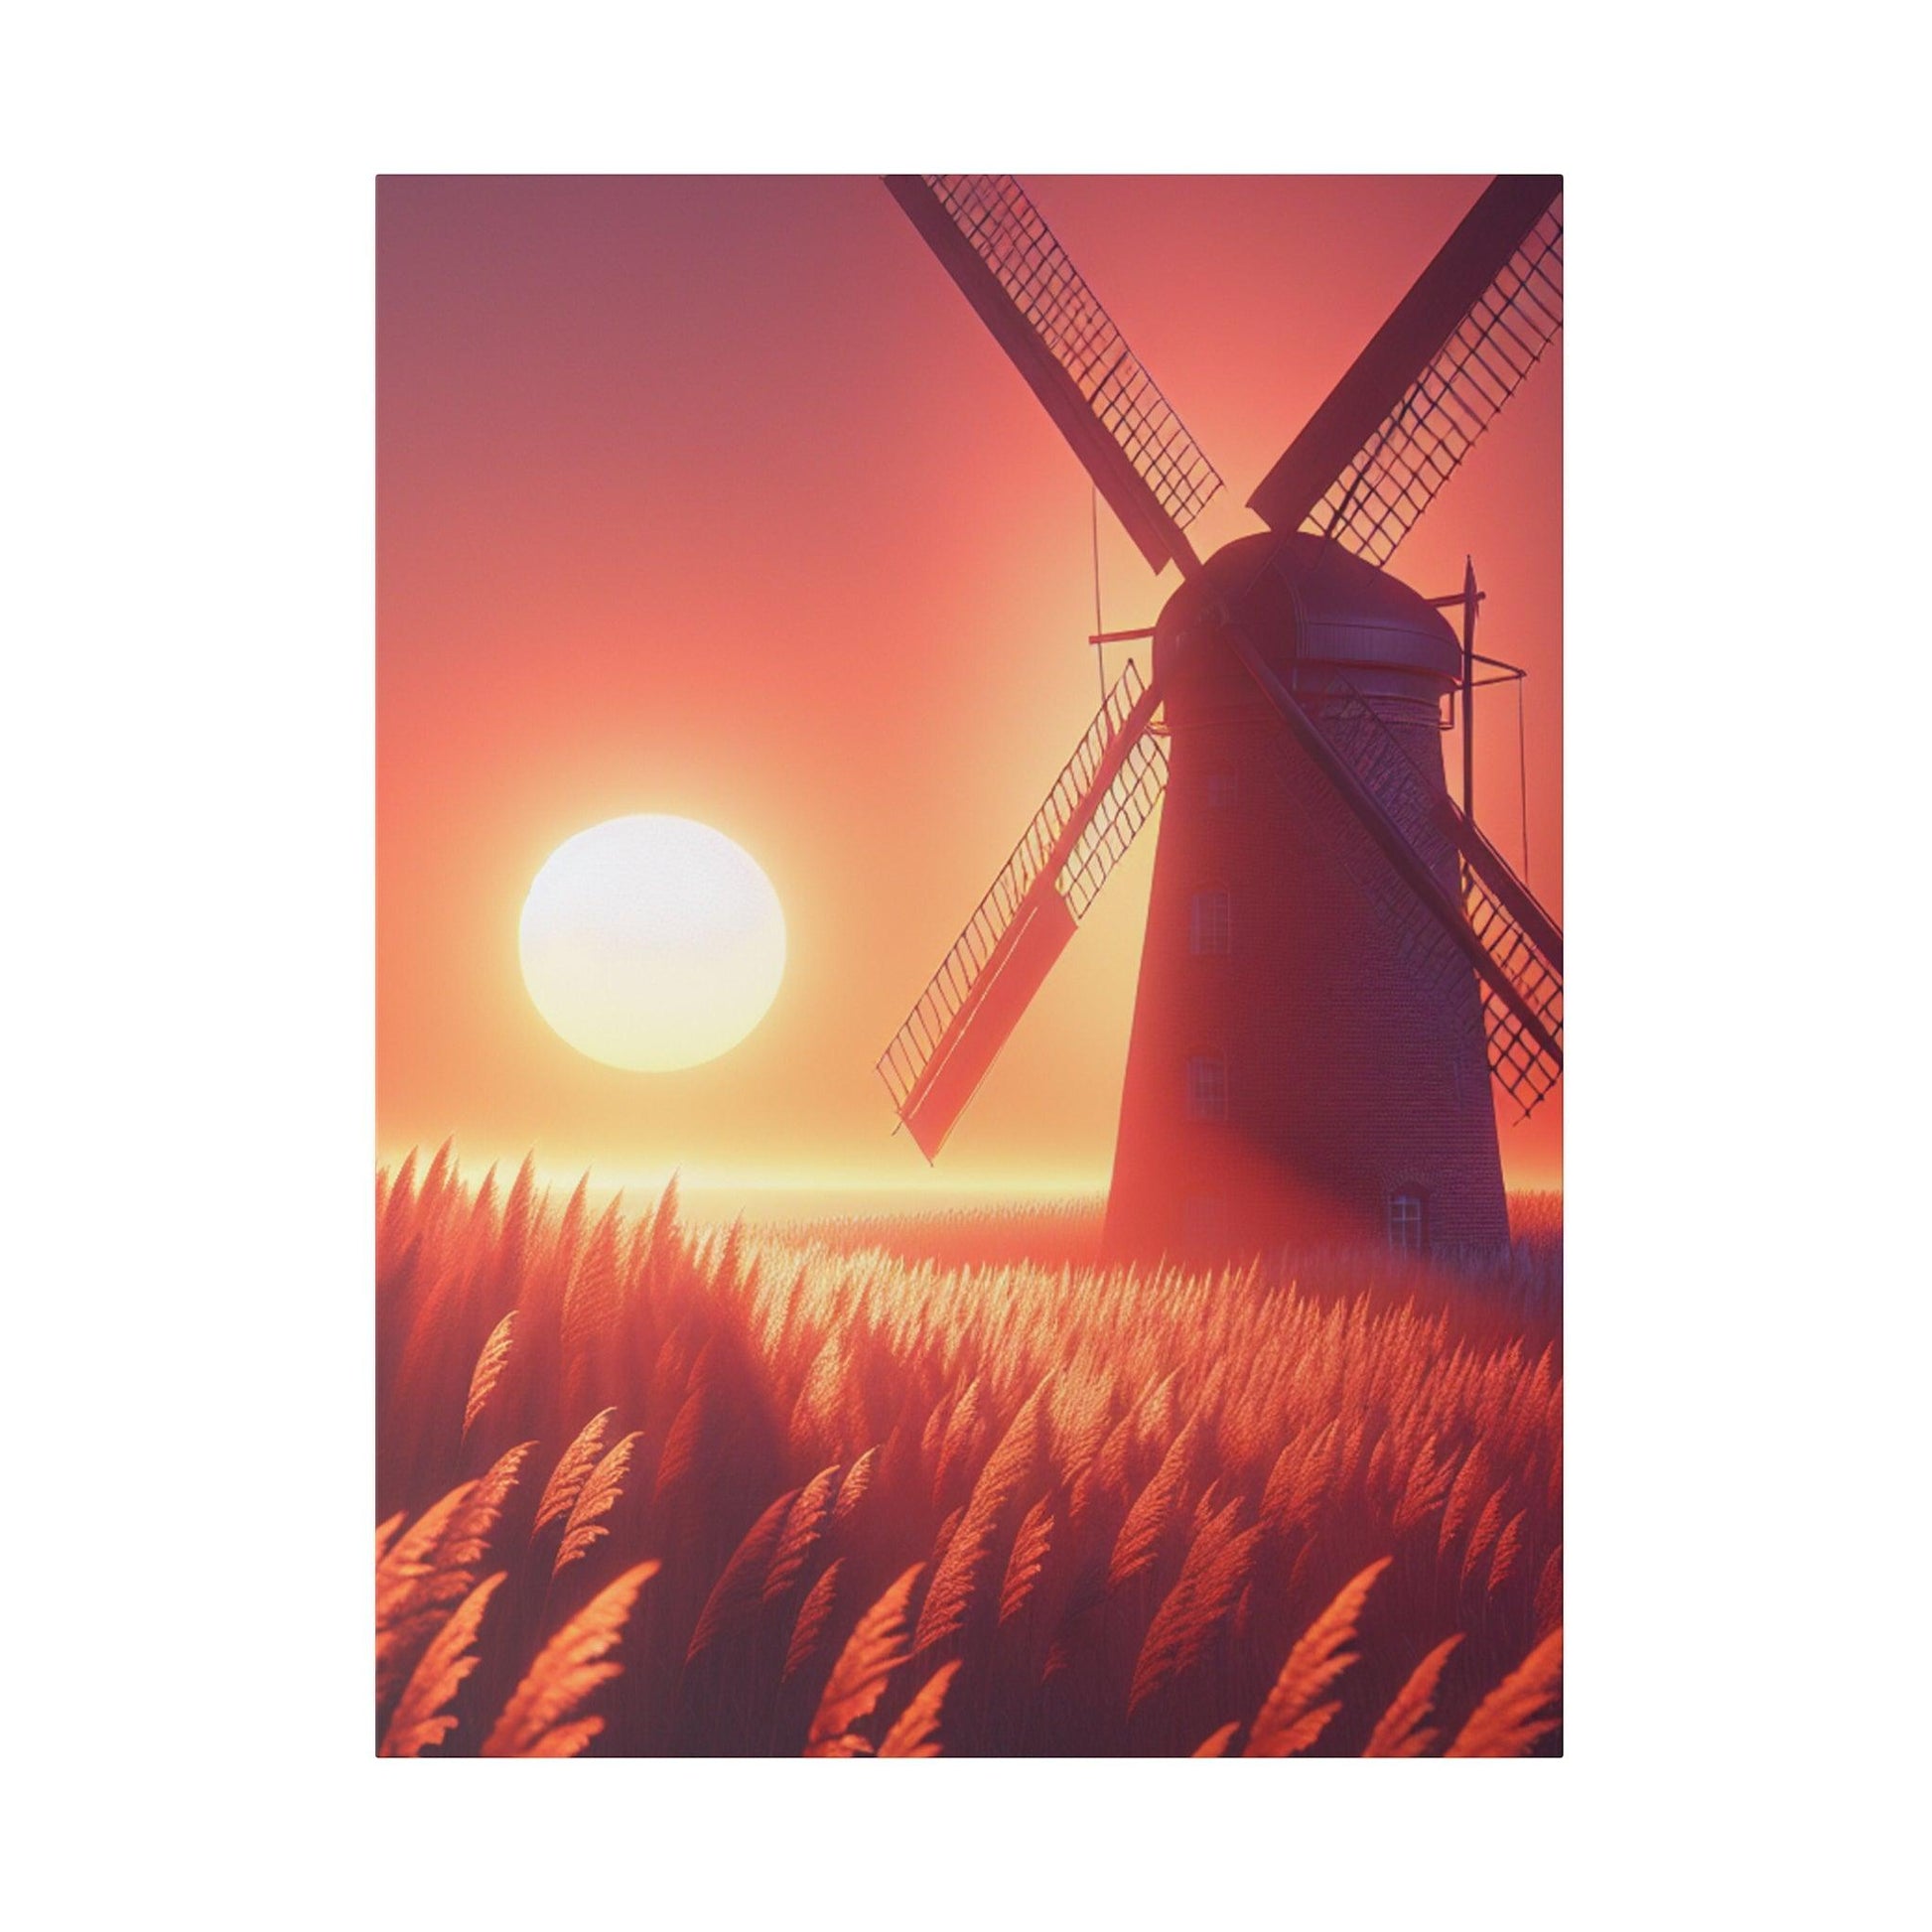 "Windmill Whispers: Vintage-Inspired Canvas Wall Art" - The Alice Gallery